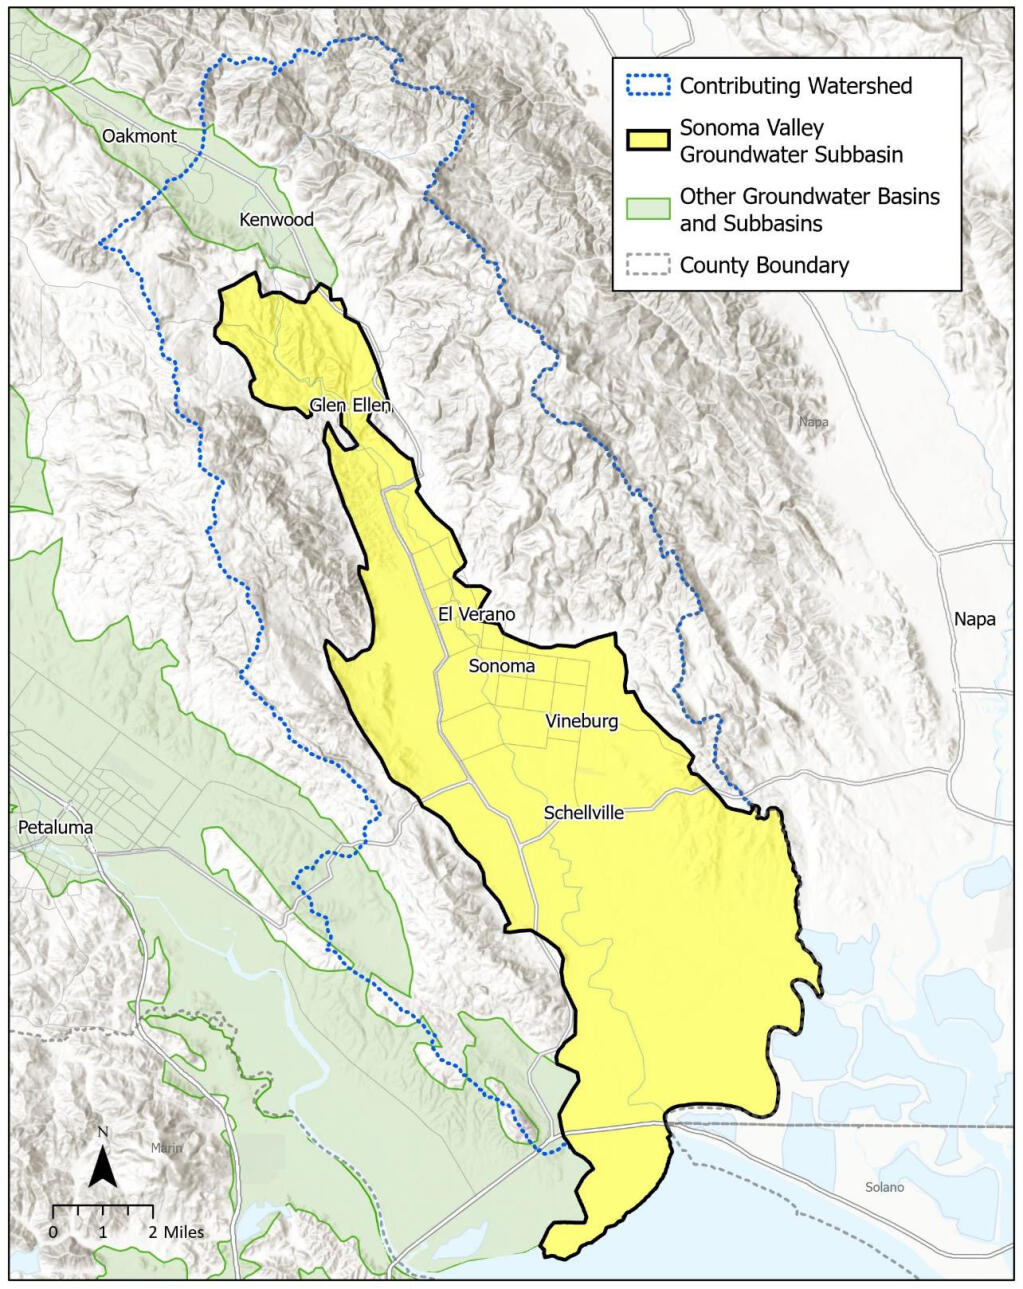 The Sonoma Valley Groundwater Subbasin, as defined in the Groundwater Sustainability Plan.